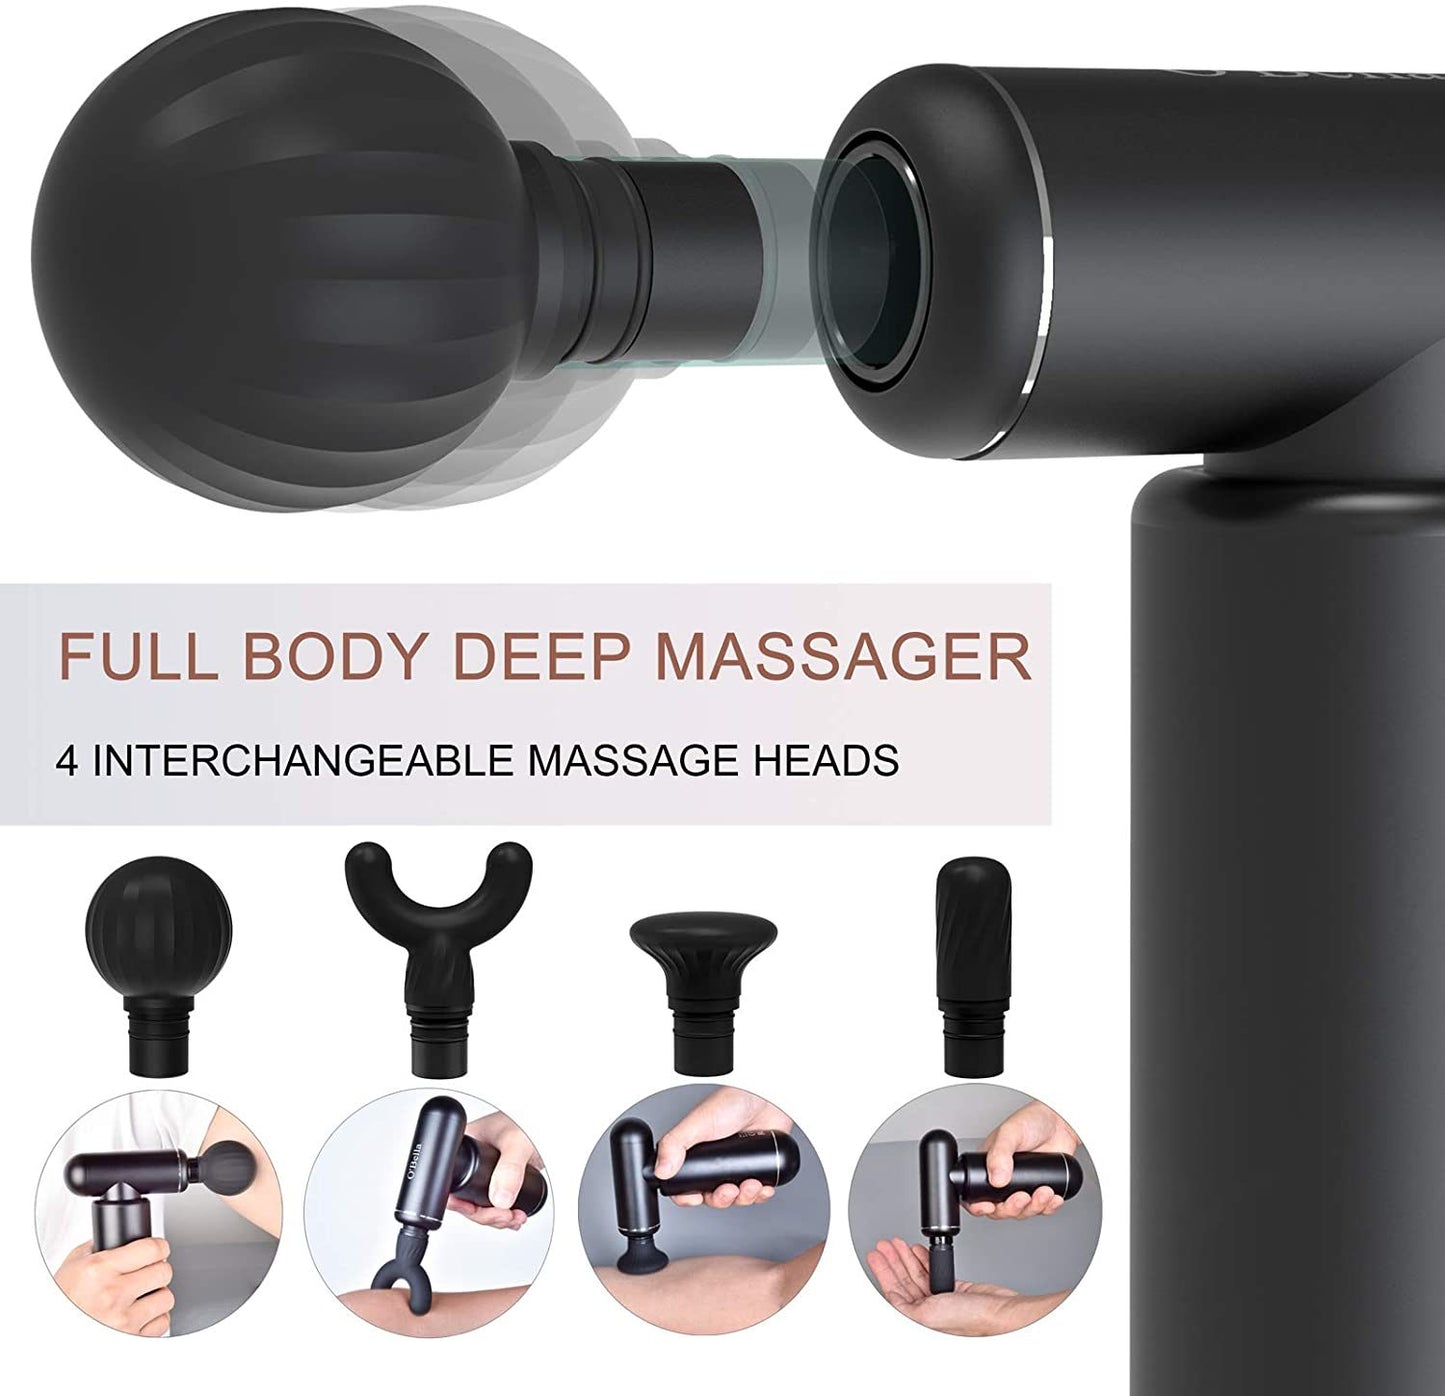 Massage Gun Deep Tissue Percussion Muscle Massager - Metal Handheld Electric Massager for Pain Relief Athletes Quiet Brushless Motor Cordless 1.1 lbs, 5 Speeds & 4 Attachments with Travel Case RT